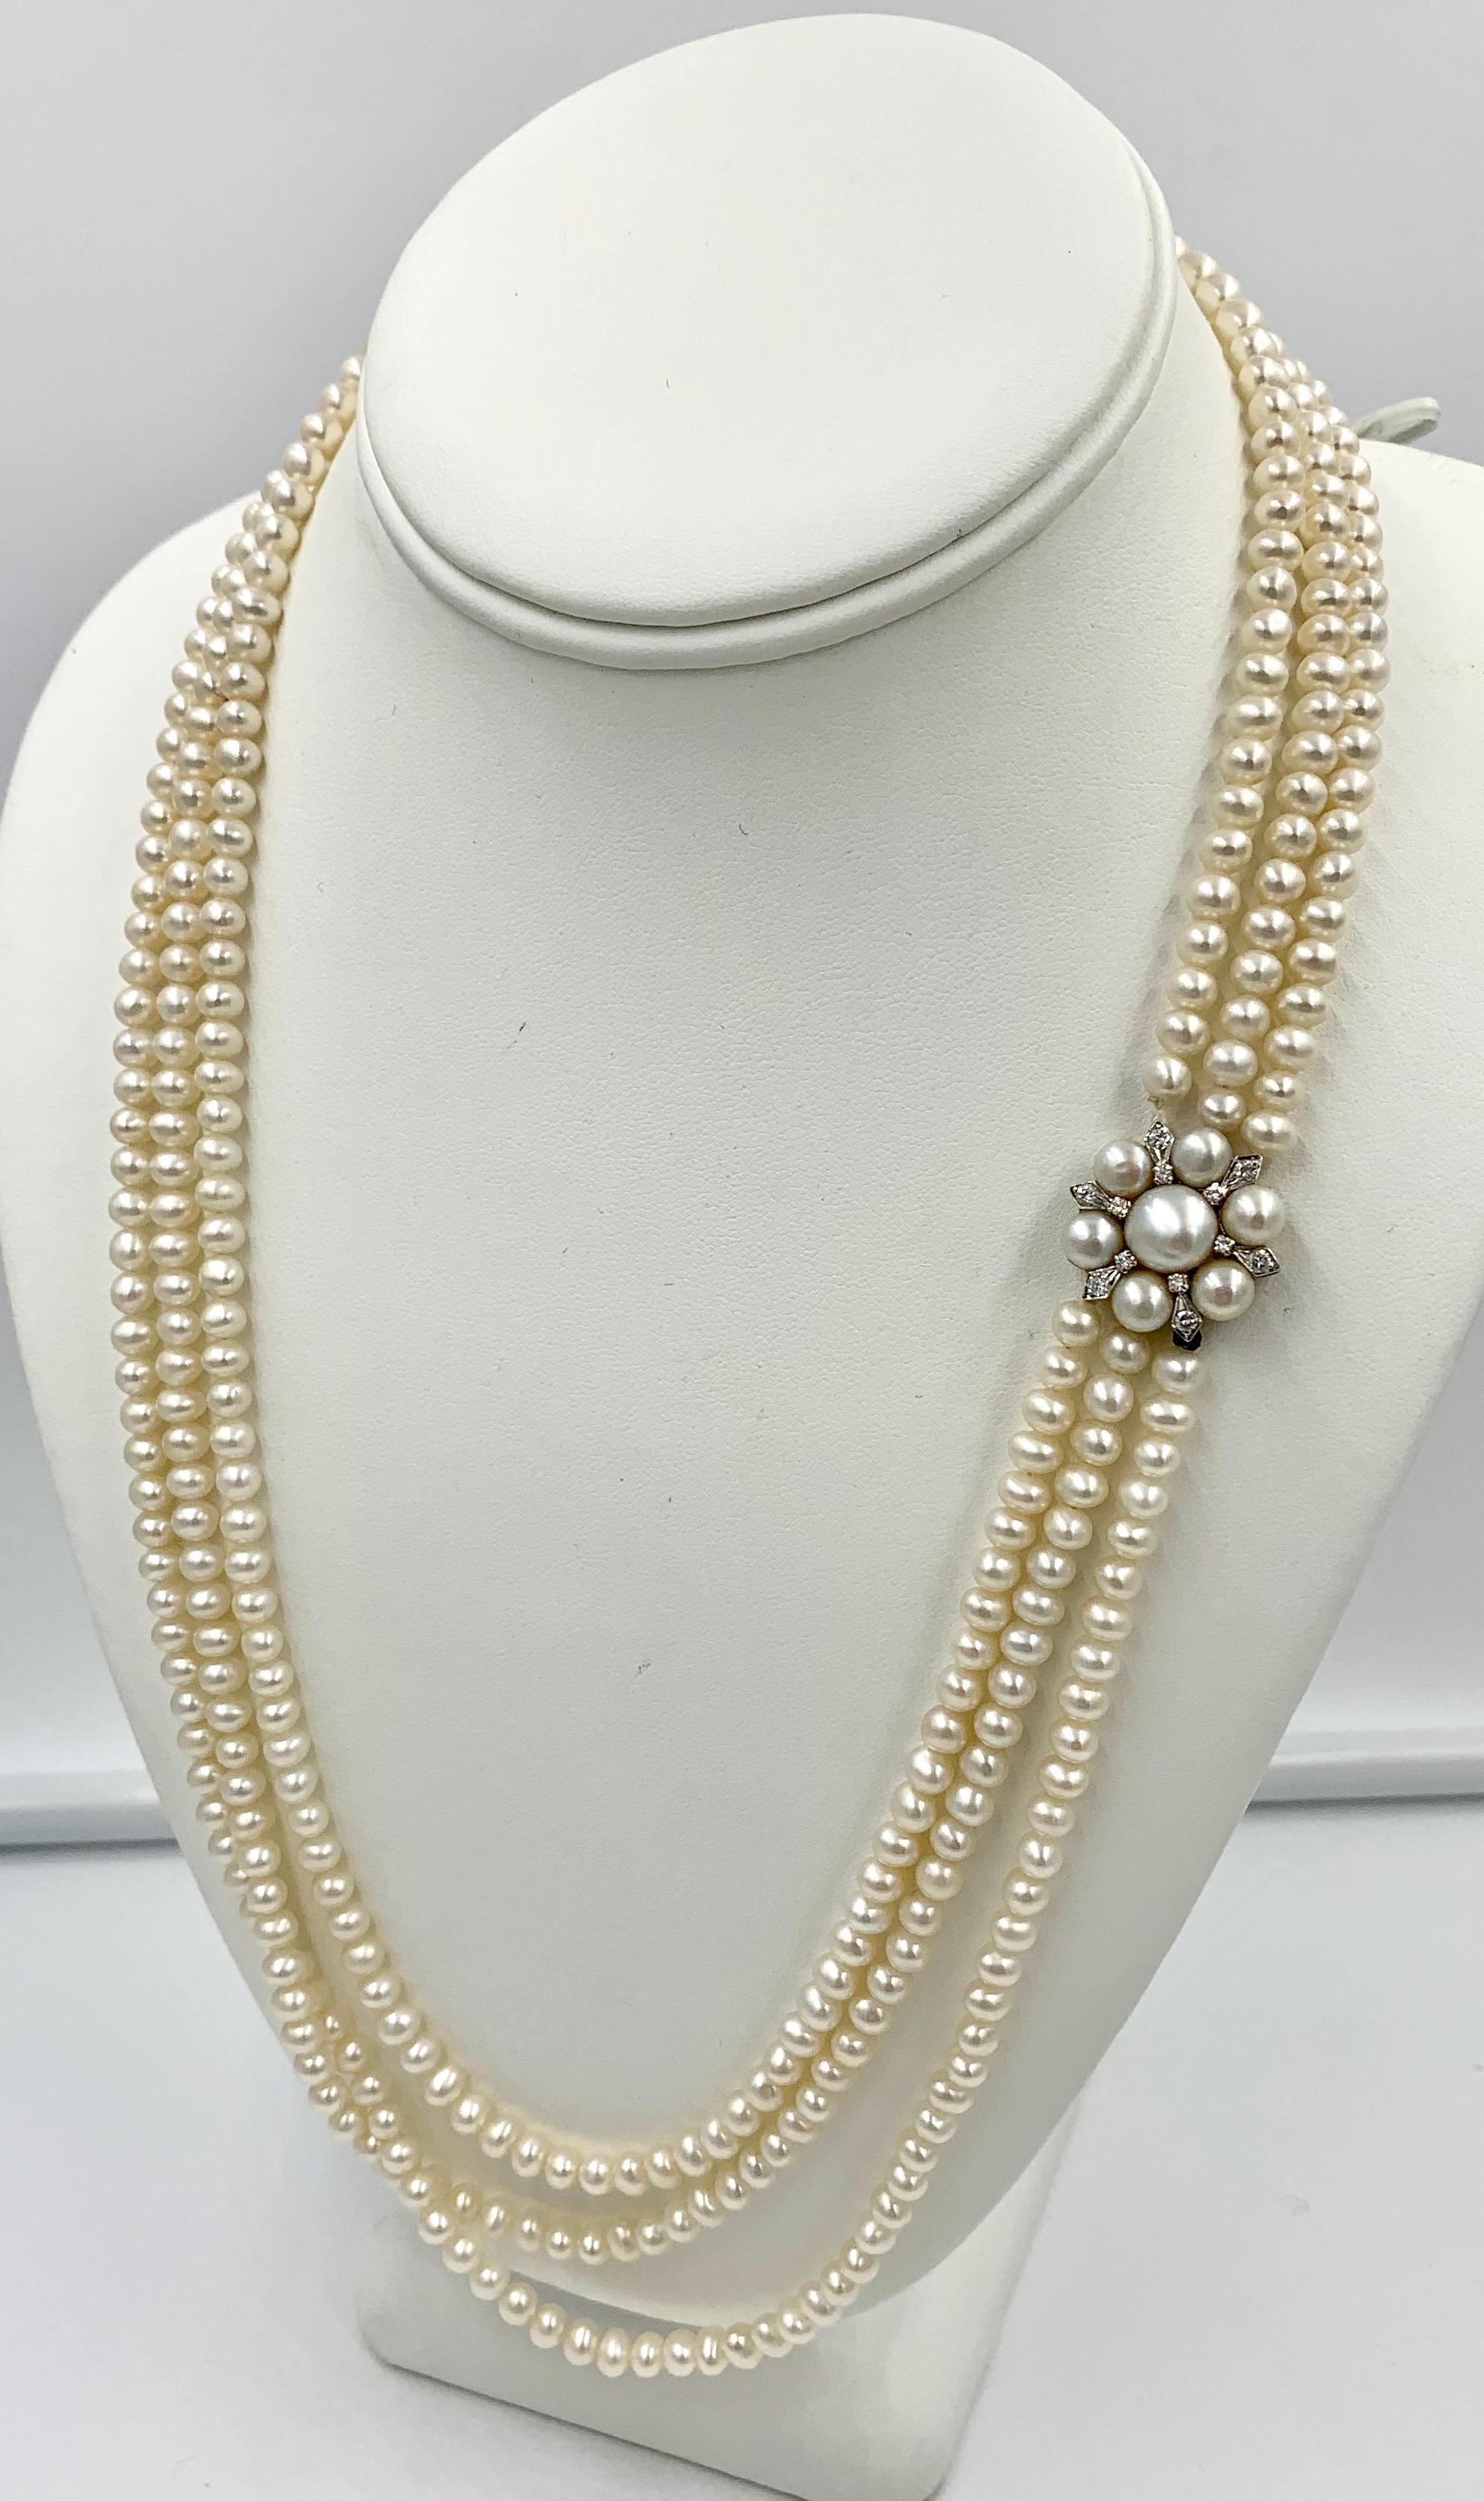 A gorgeous antique Triple Strand Pearl and Diamond Necklace in 14 Karat White Gold.  The Retro Hollywood Regency jewel is a stunner.  It has three rows of 5 mm luscious Pearls.  The Pearls are stunning with beautiful nacre and lustre.  The clasp is